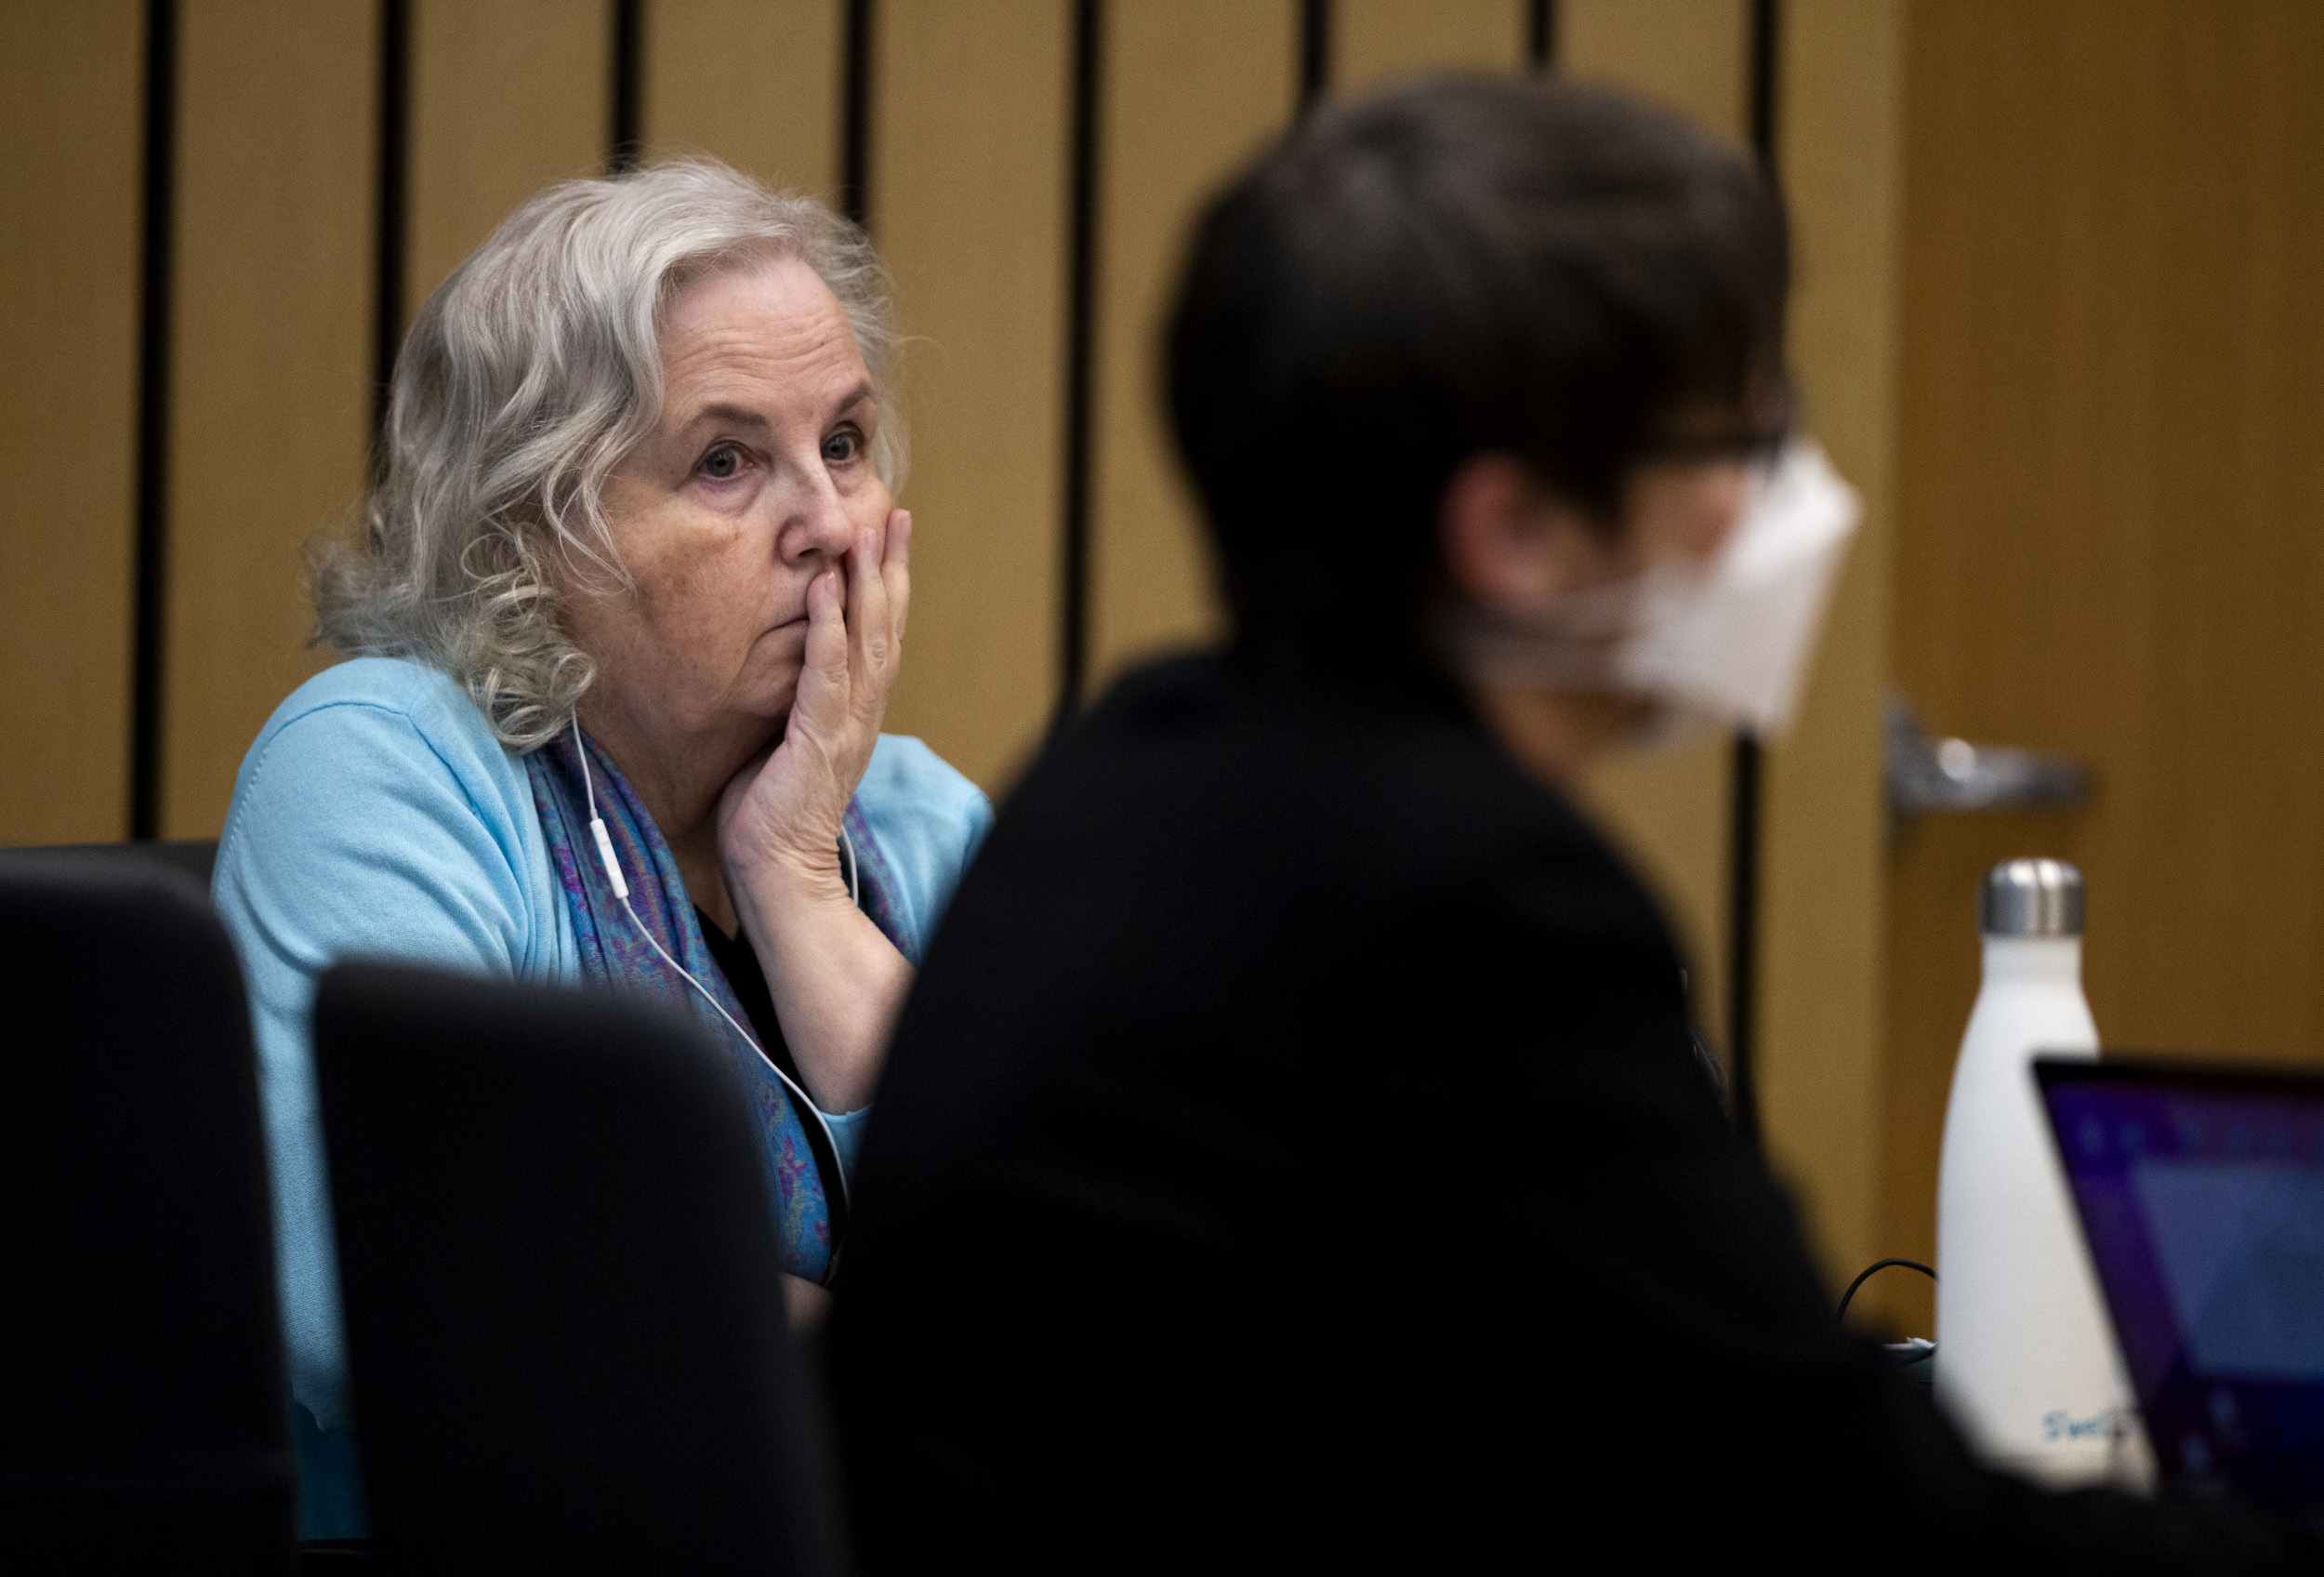 FILE - Romance writer Nancy Crampton Brophy, left, accused of killing her husband, Dan Brophy, in June 2018, watches proceedings in court in Portland, Ore., Monday, April 4, 2022. A jury in Portland, Oregon, has convicted the self-published romance novelist — who once wrote an essay titled "How to Kill Your Husband" — of fatally shooting her husband four years ago. (Dave Killen/The Oregonian via AP, Pool, File Photo)